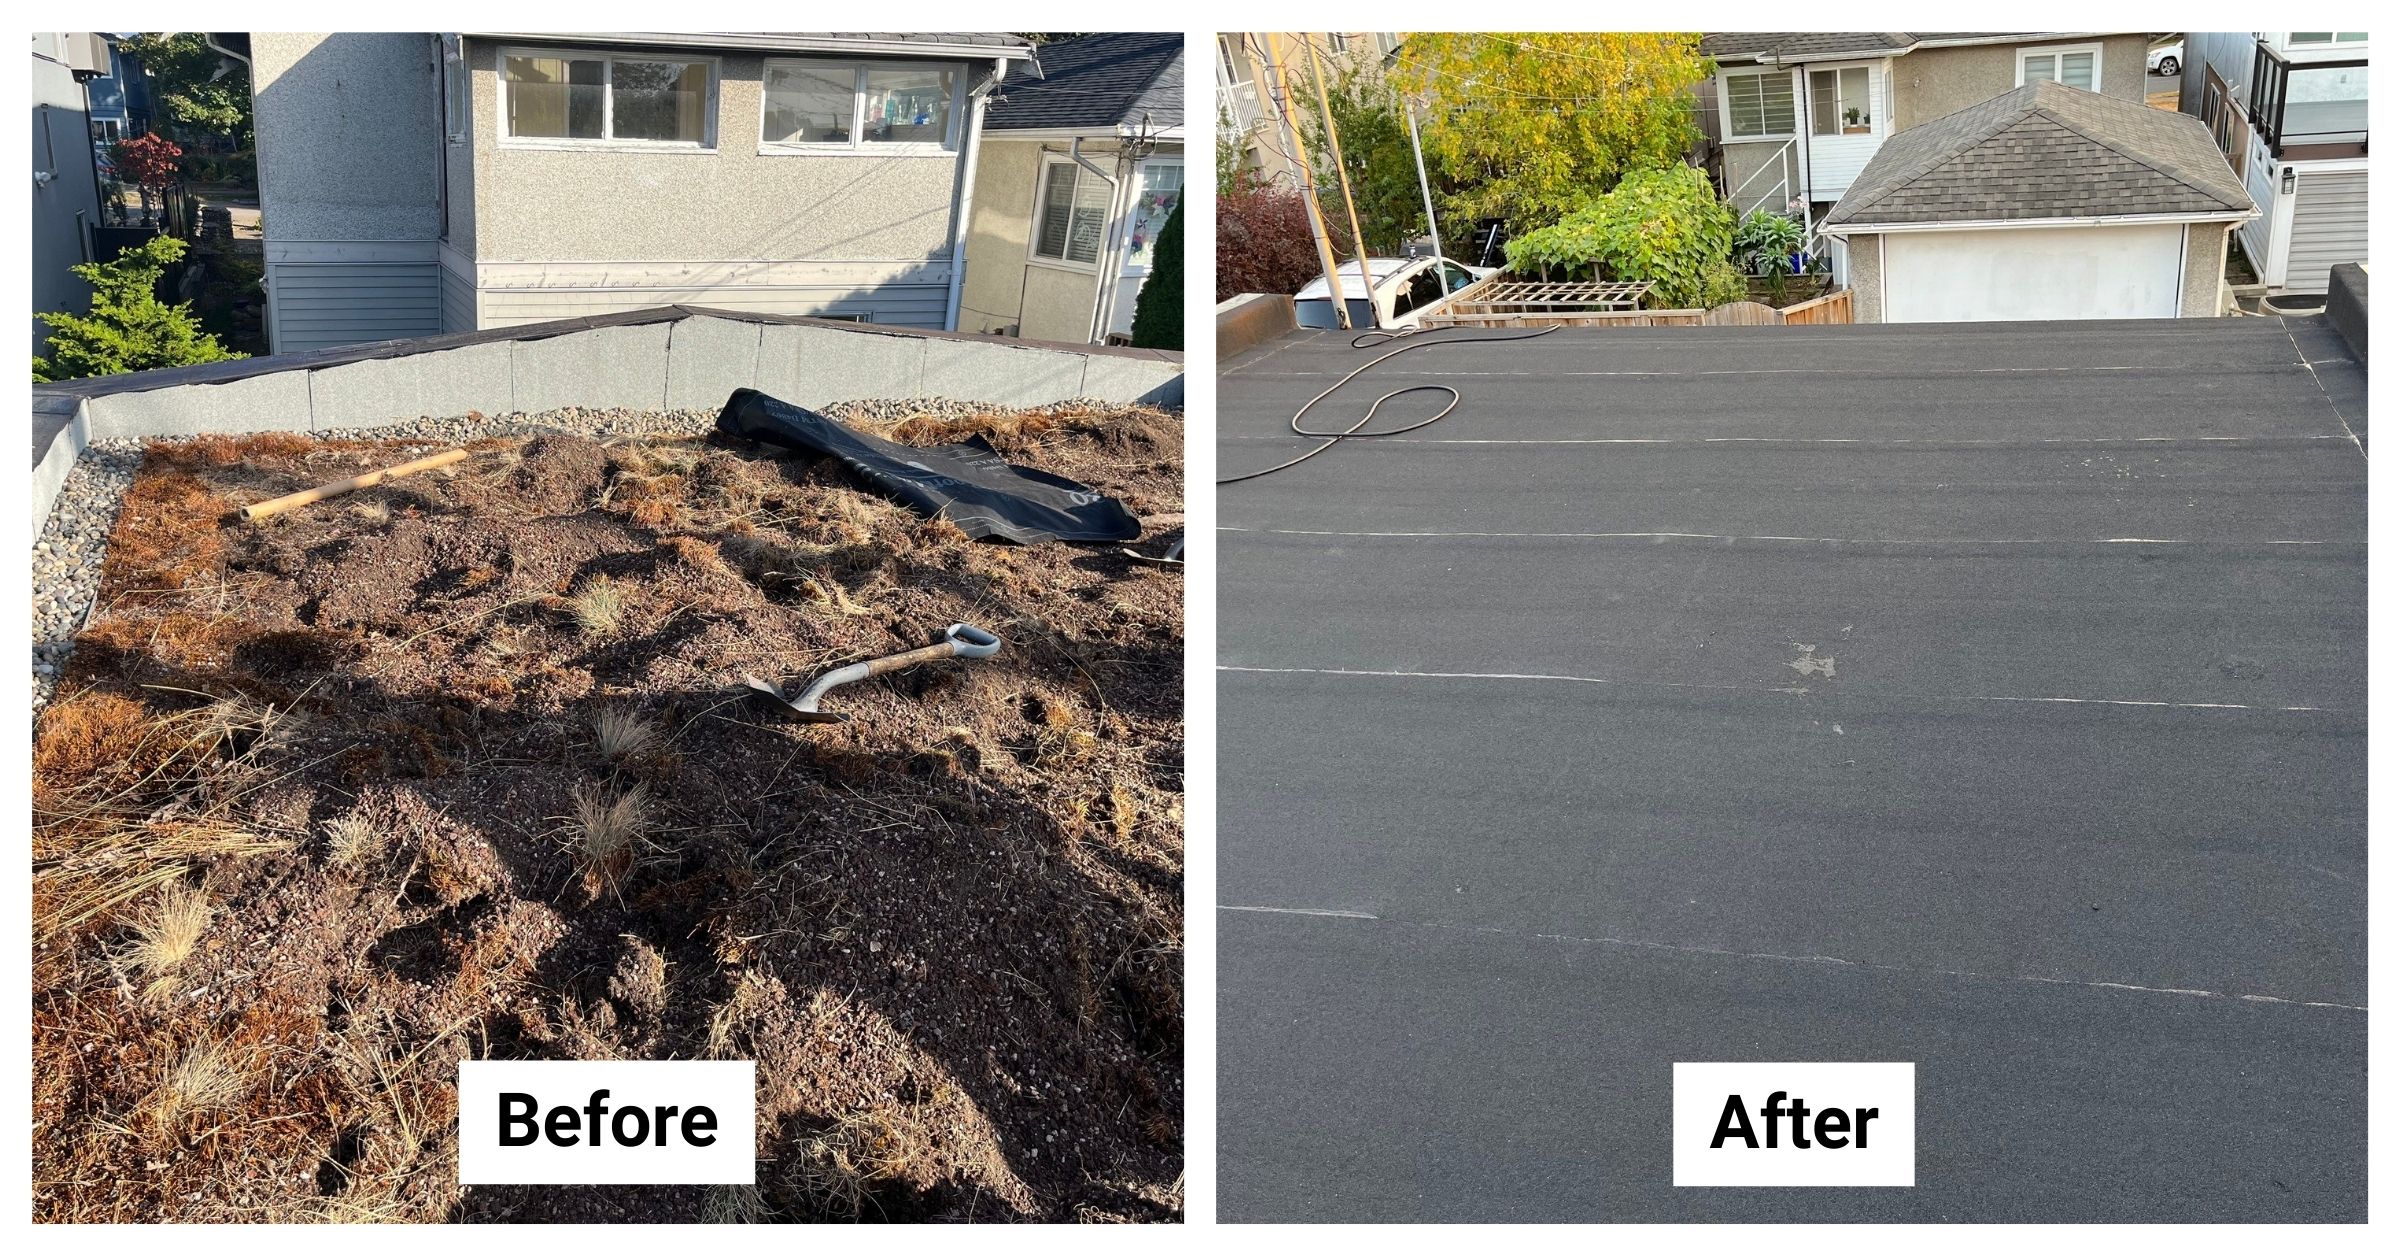 Roof Replacement - from Rolled Roofing to Rolled Roofing - 2628 Adanac Street, Vancouver, BC V5K 2M7